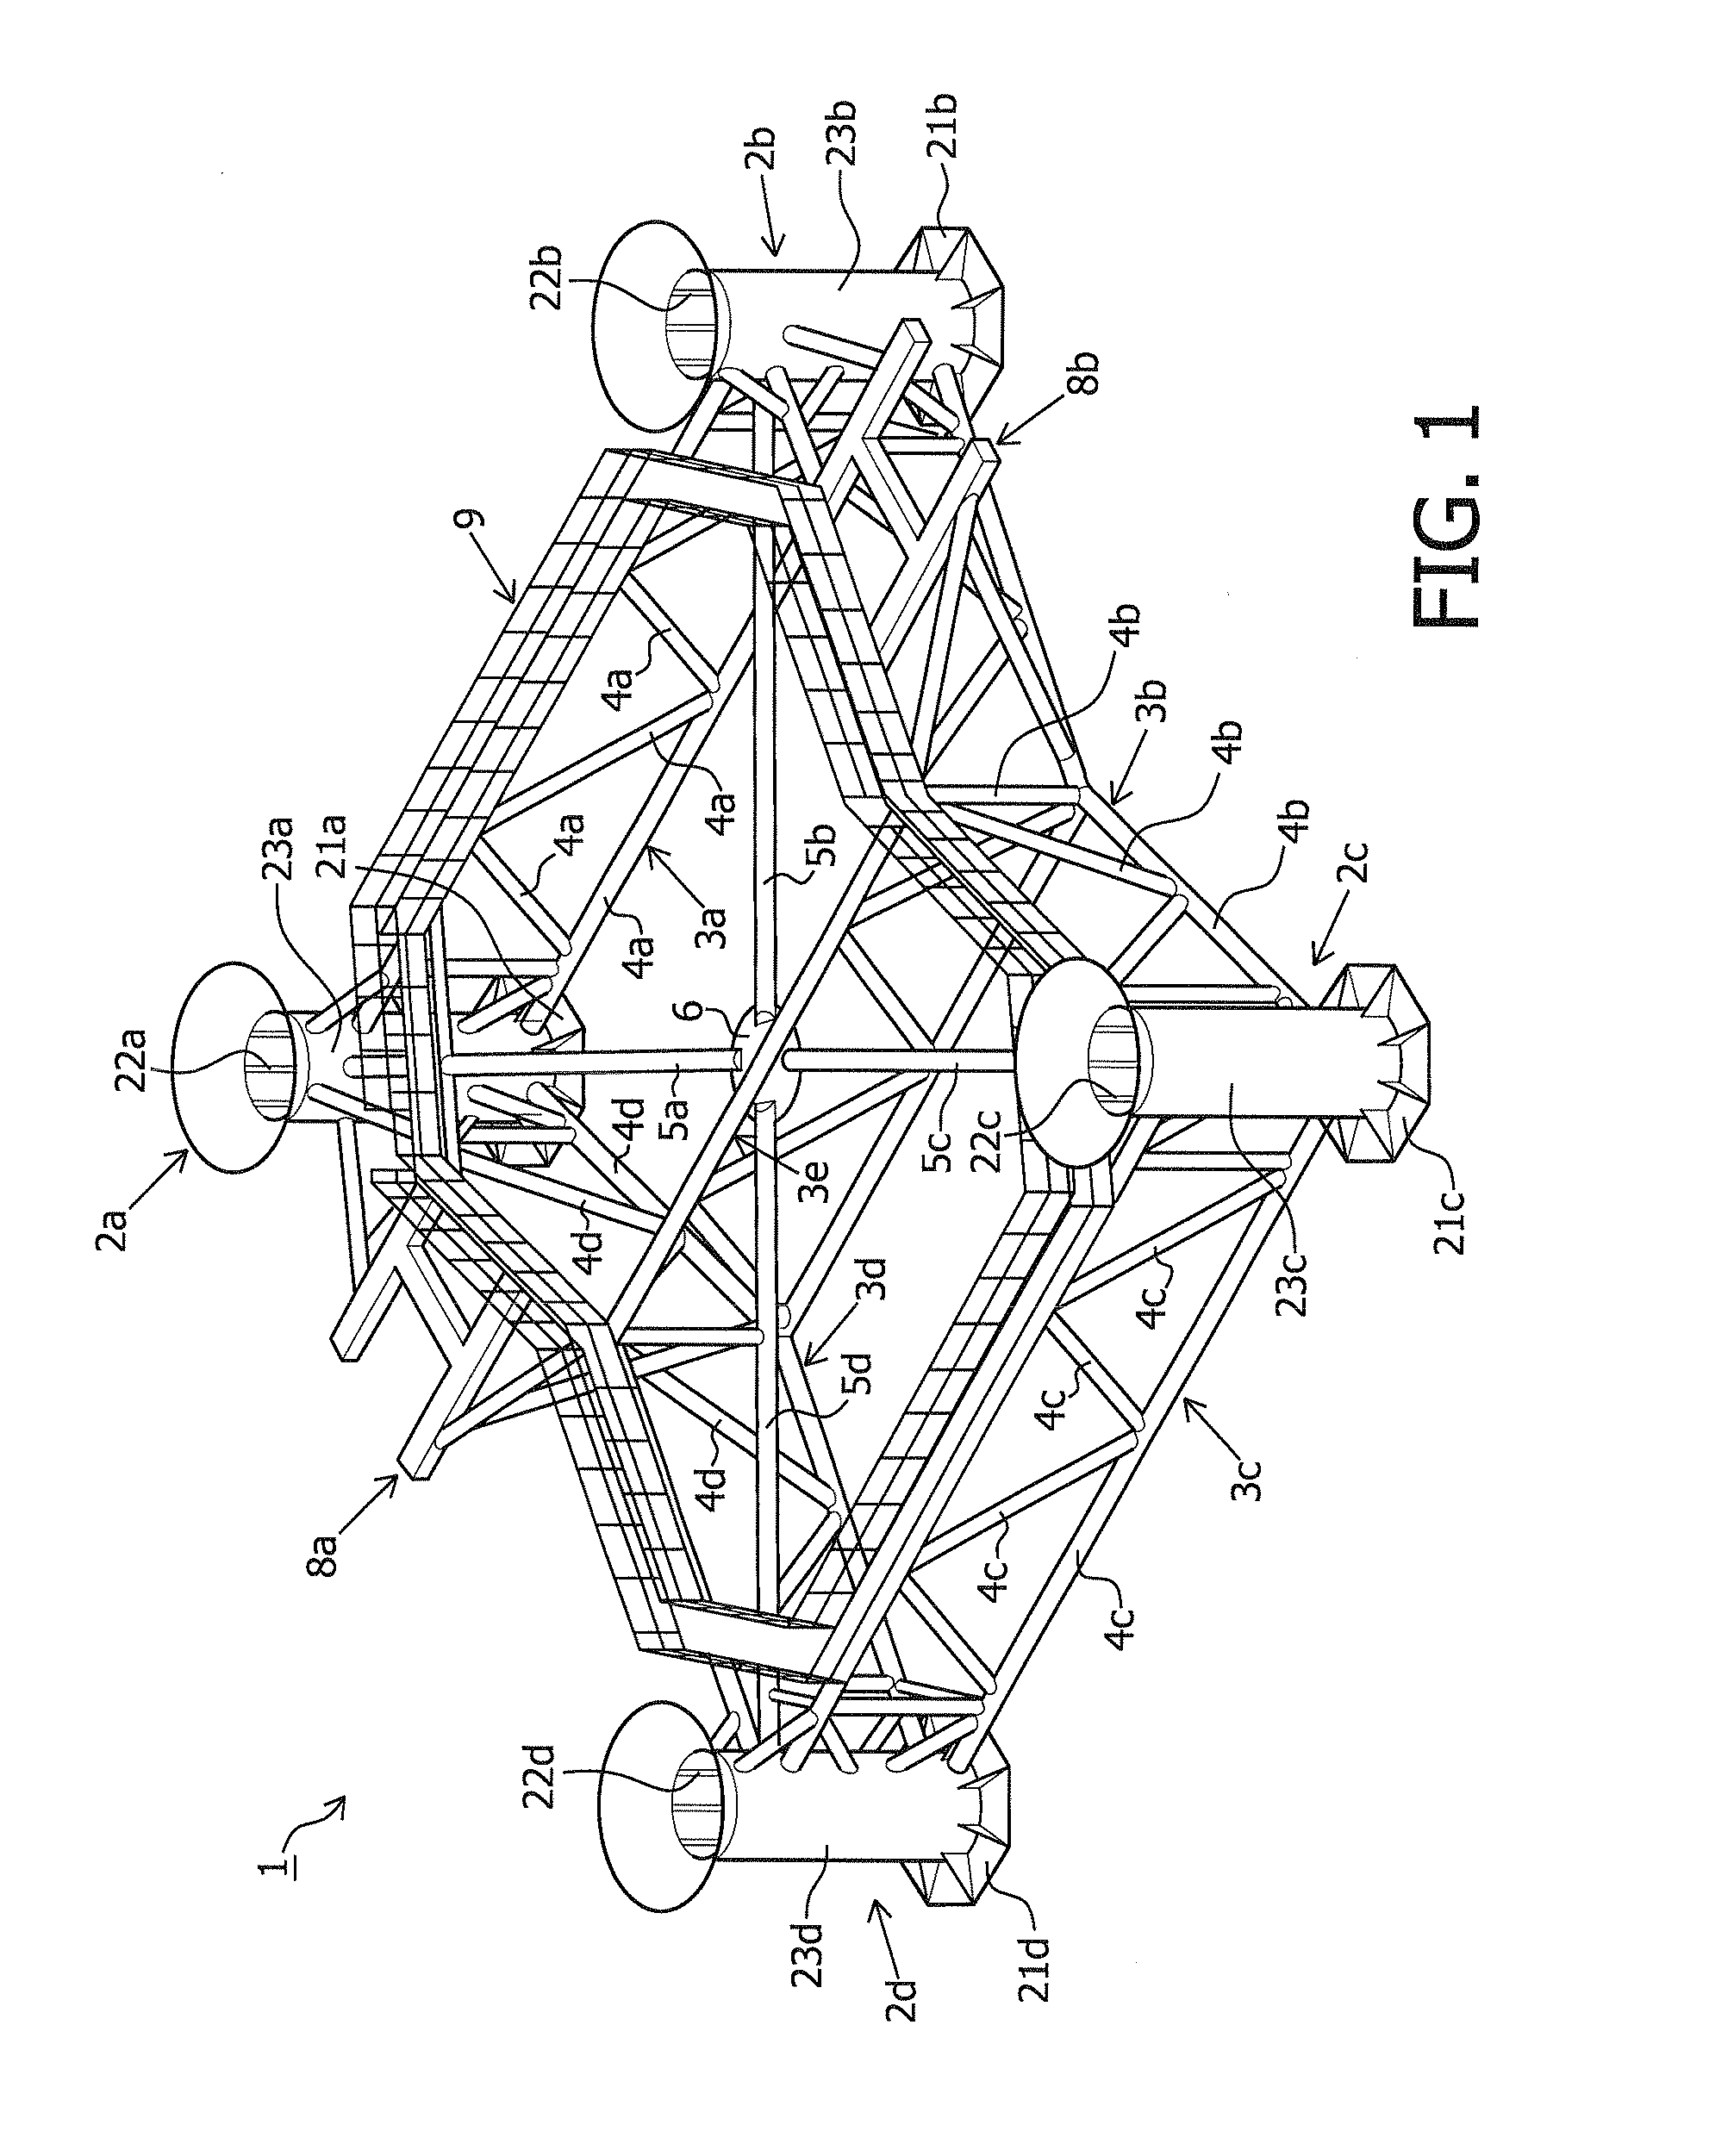 Method of Providing a Foundation for an Elevated Mass, and Assembly of a Jack-Up Platform and a Framed Template for Carrying Out the Method